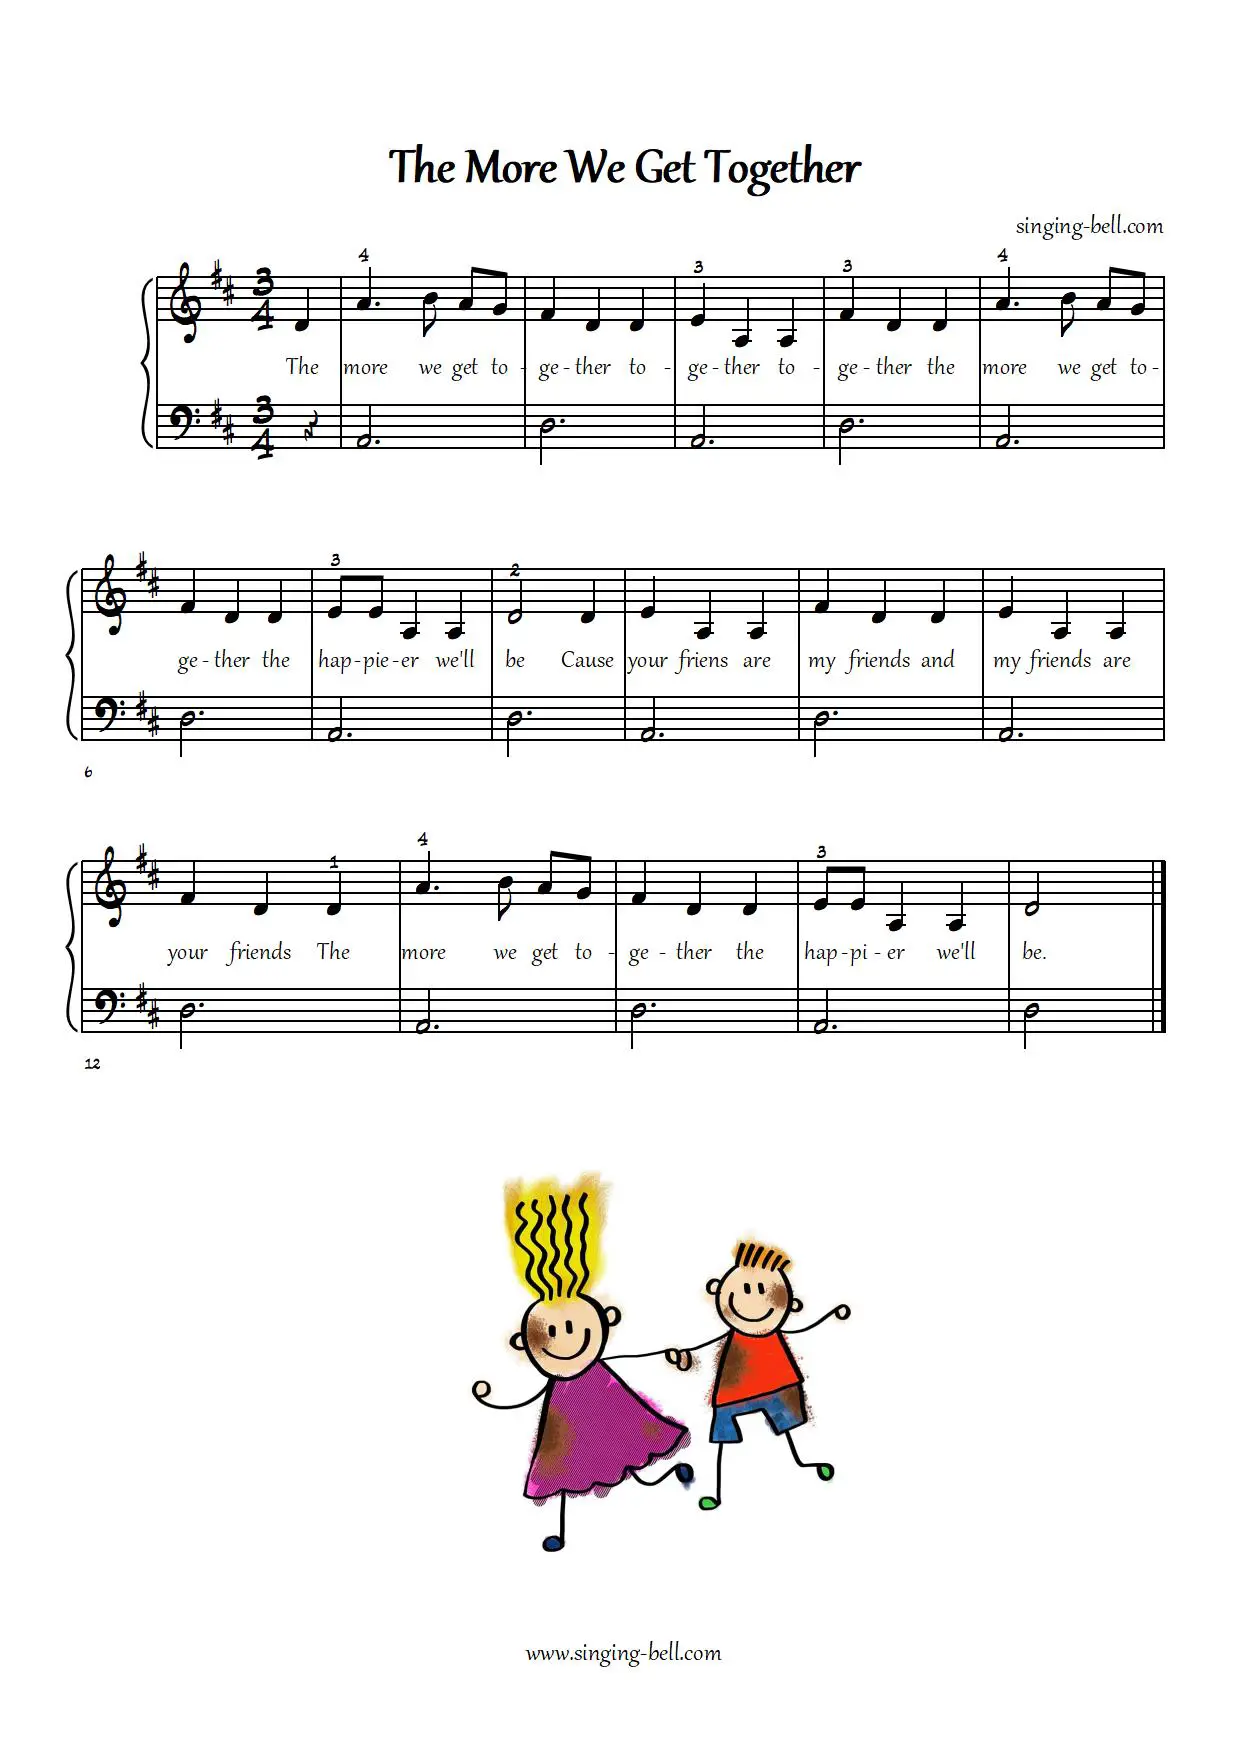 The more we get together easy piano sheet music notes chords beginners pdf